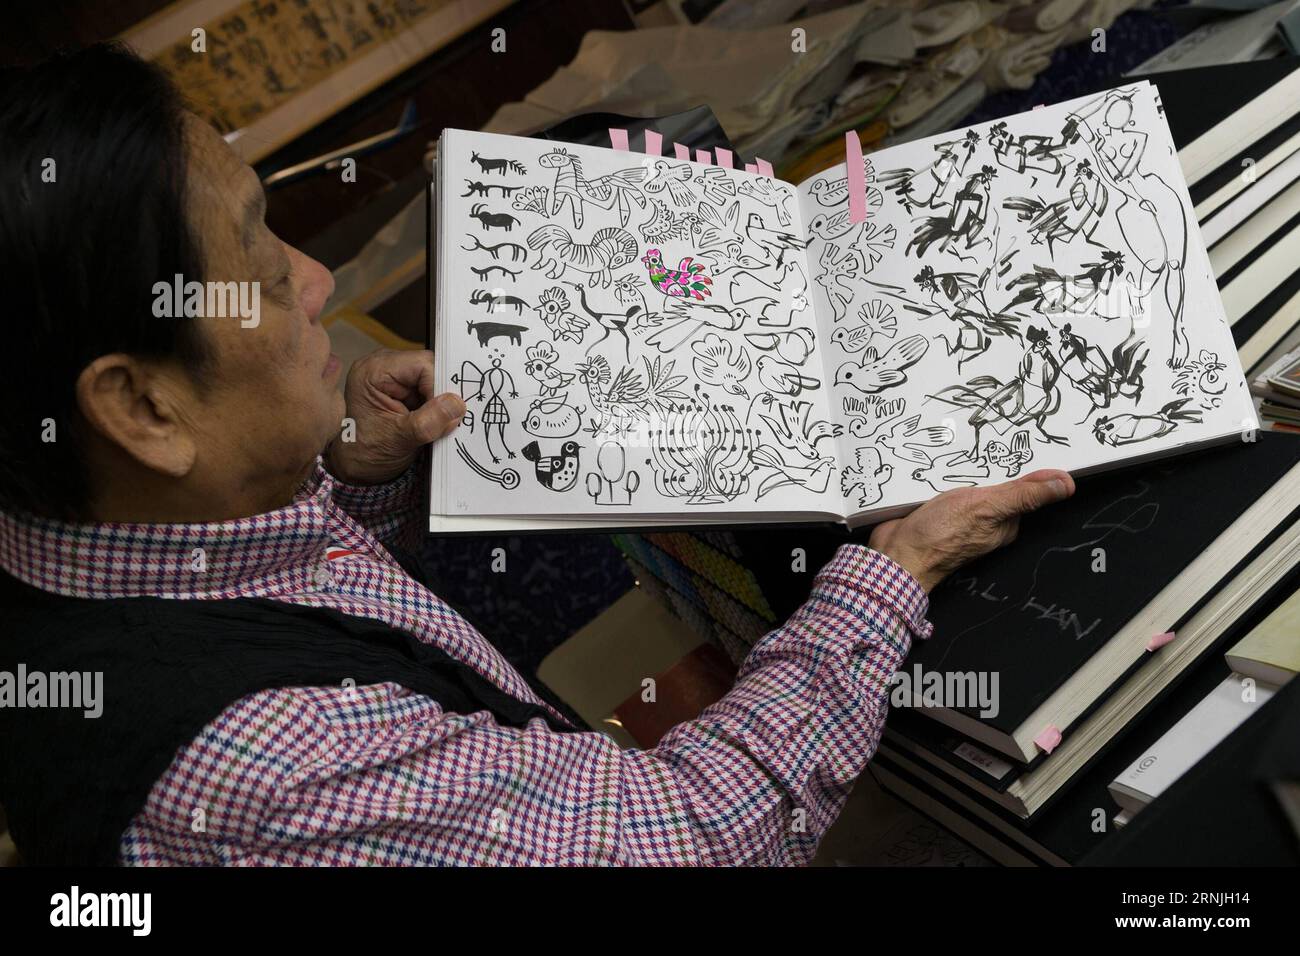 (170126) -- BEIJING, Jan. 26, 2017 -- Chinese artist Han Meilin, 80, shows his sketches at his studio in eastern district of Tongzhou in Beijing, capital of China, Jan. 24, 2017. Han, designer of the 2008 Beijing Olympic Games mascot Fuwa, has just finished the design of Chinese zodiac stamps for the upcoming Year of the Rooster. The set of Chinese Lunar New Year rooster stamps, issued earlier this month, contain two items showing a rooster striding proudly and a hen looking after her two chicks. Han applied rich color and elements of traditional Chinese painting to depict a happy family of ro Stock Photo